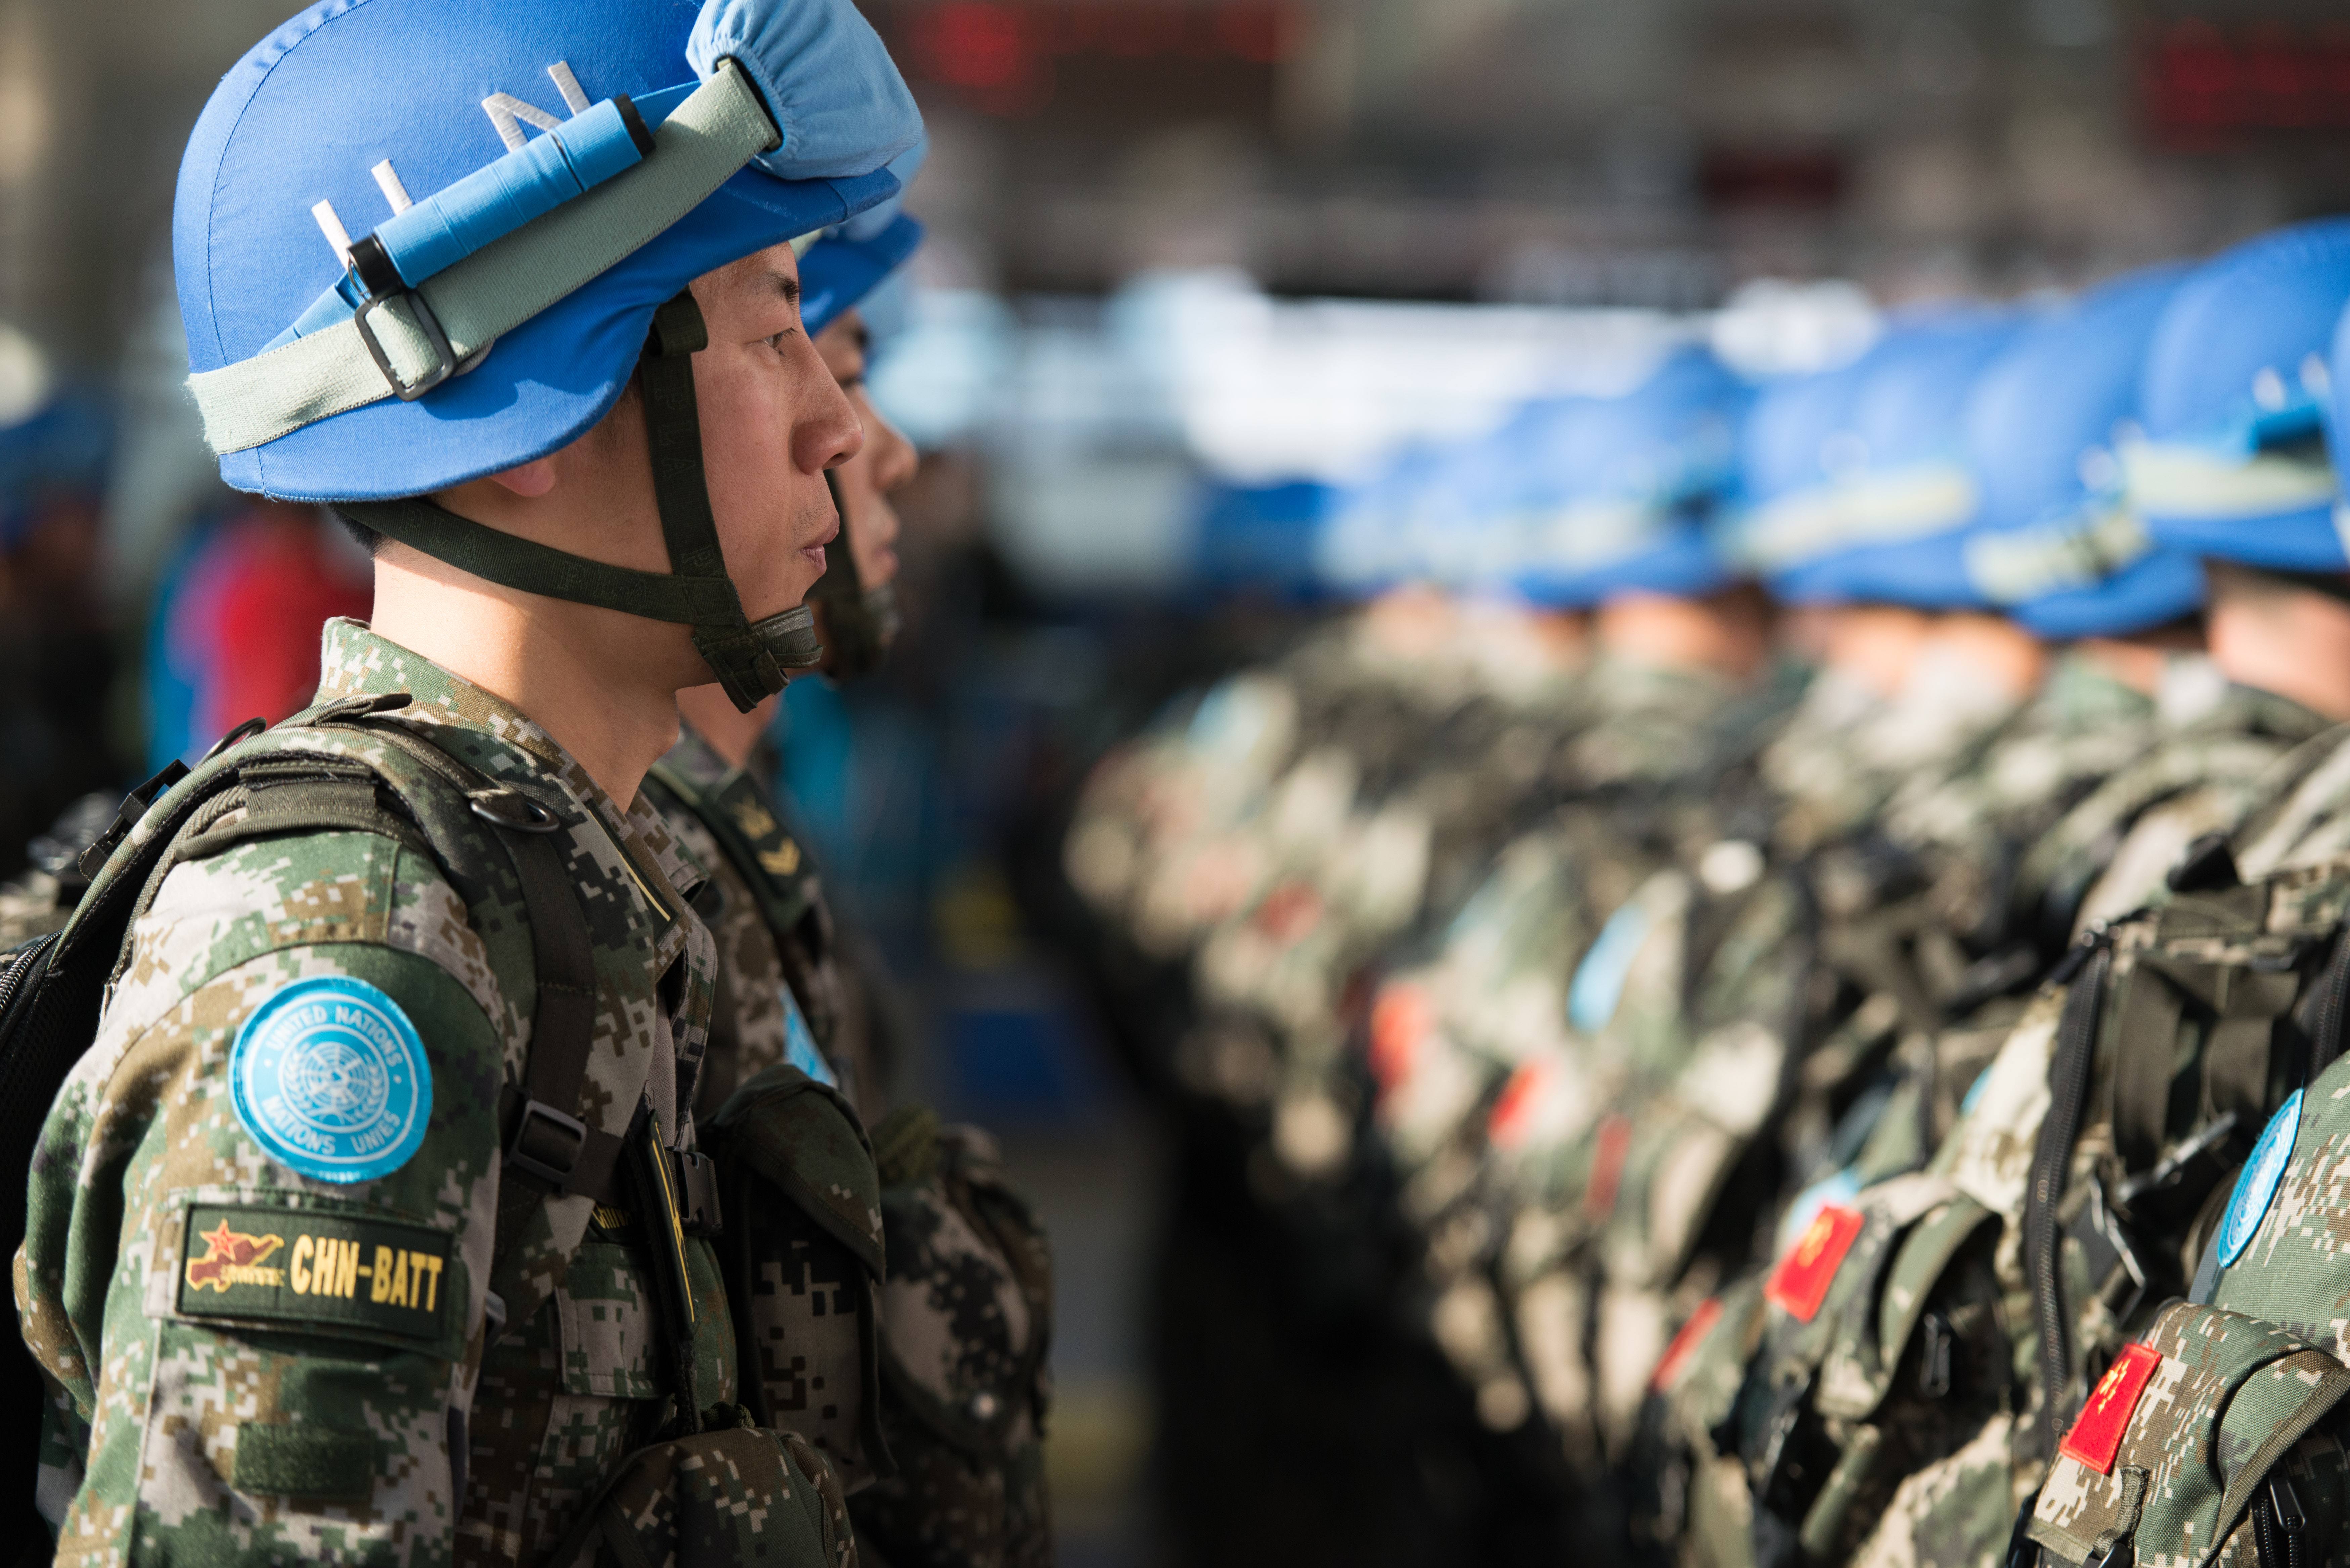 China's pragmatic approach to UN peacekeeping